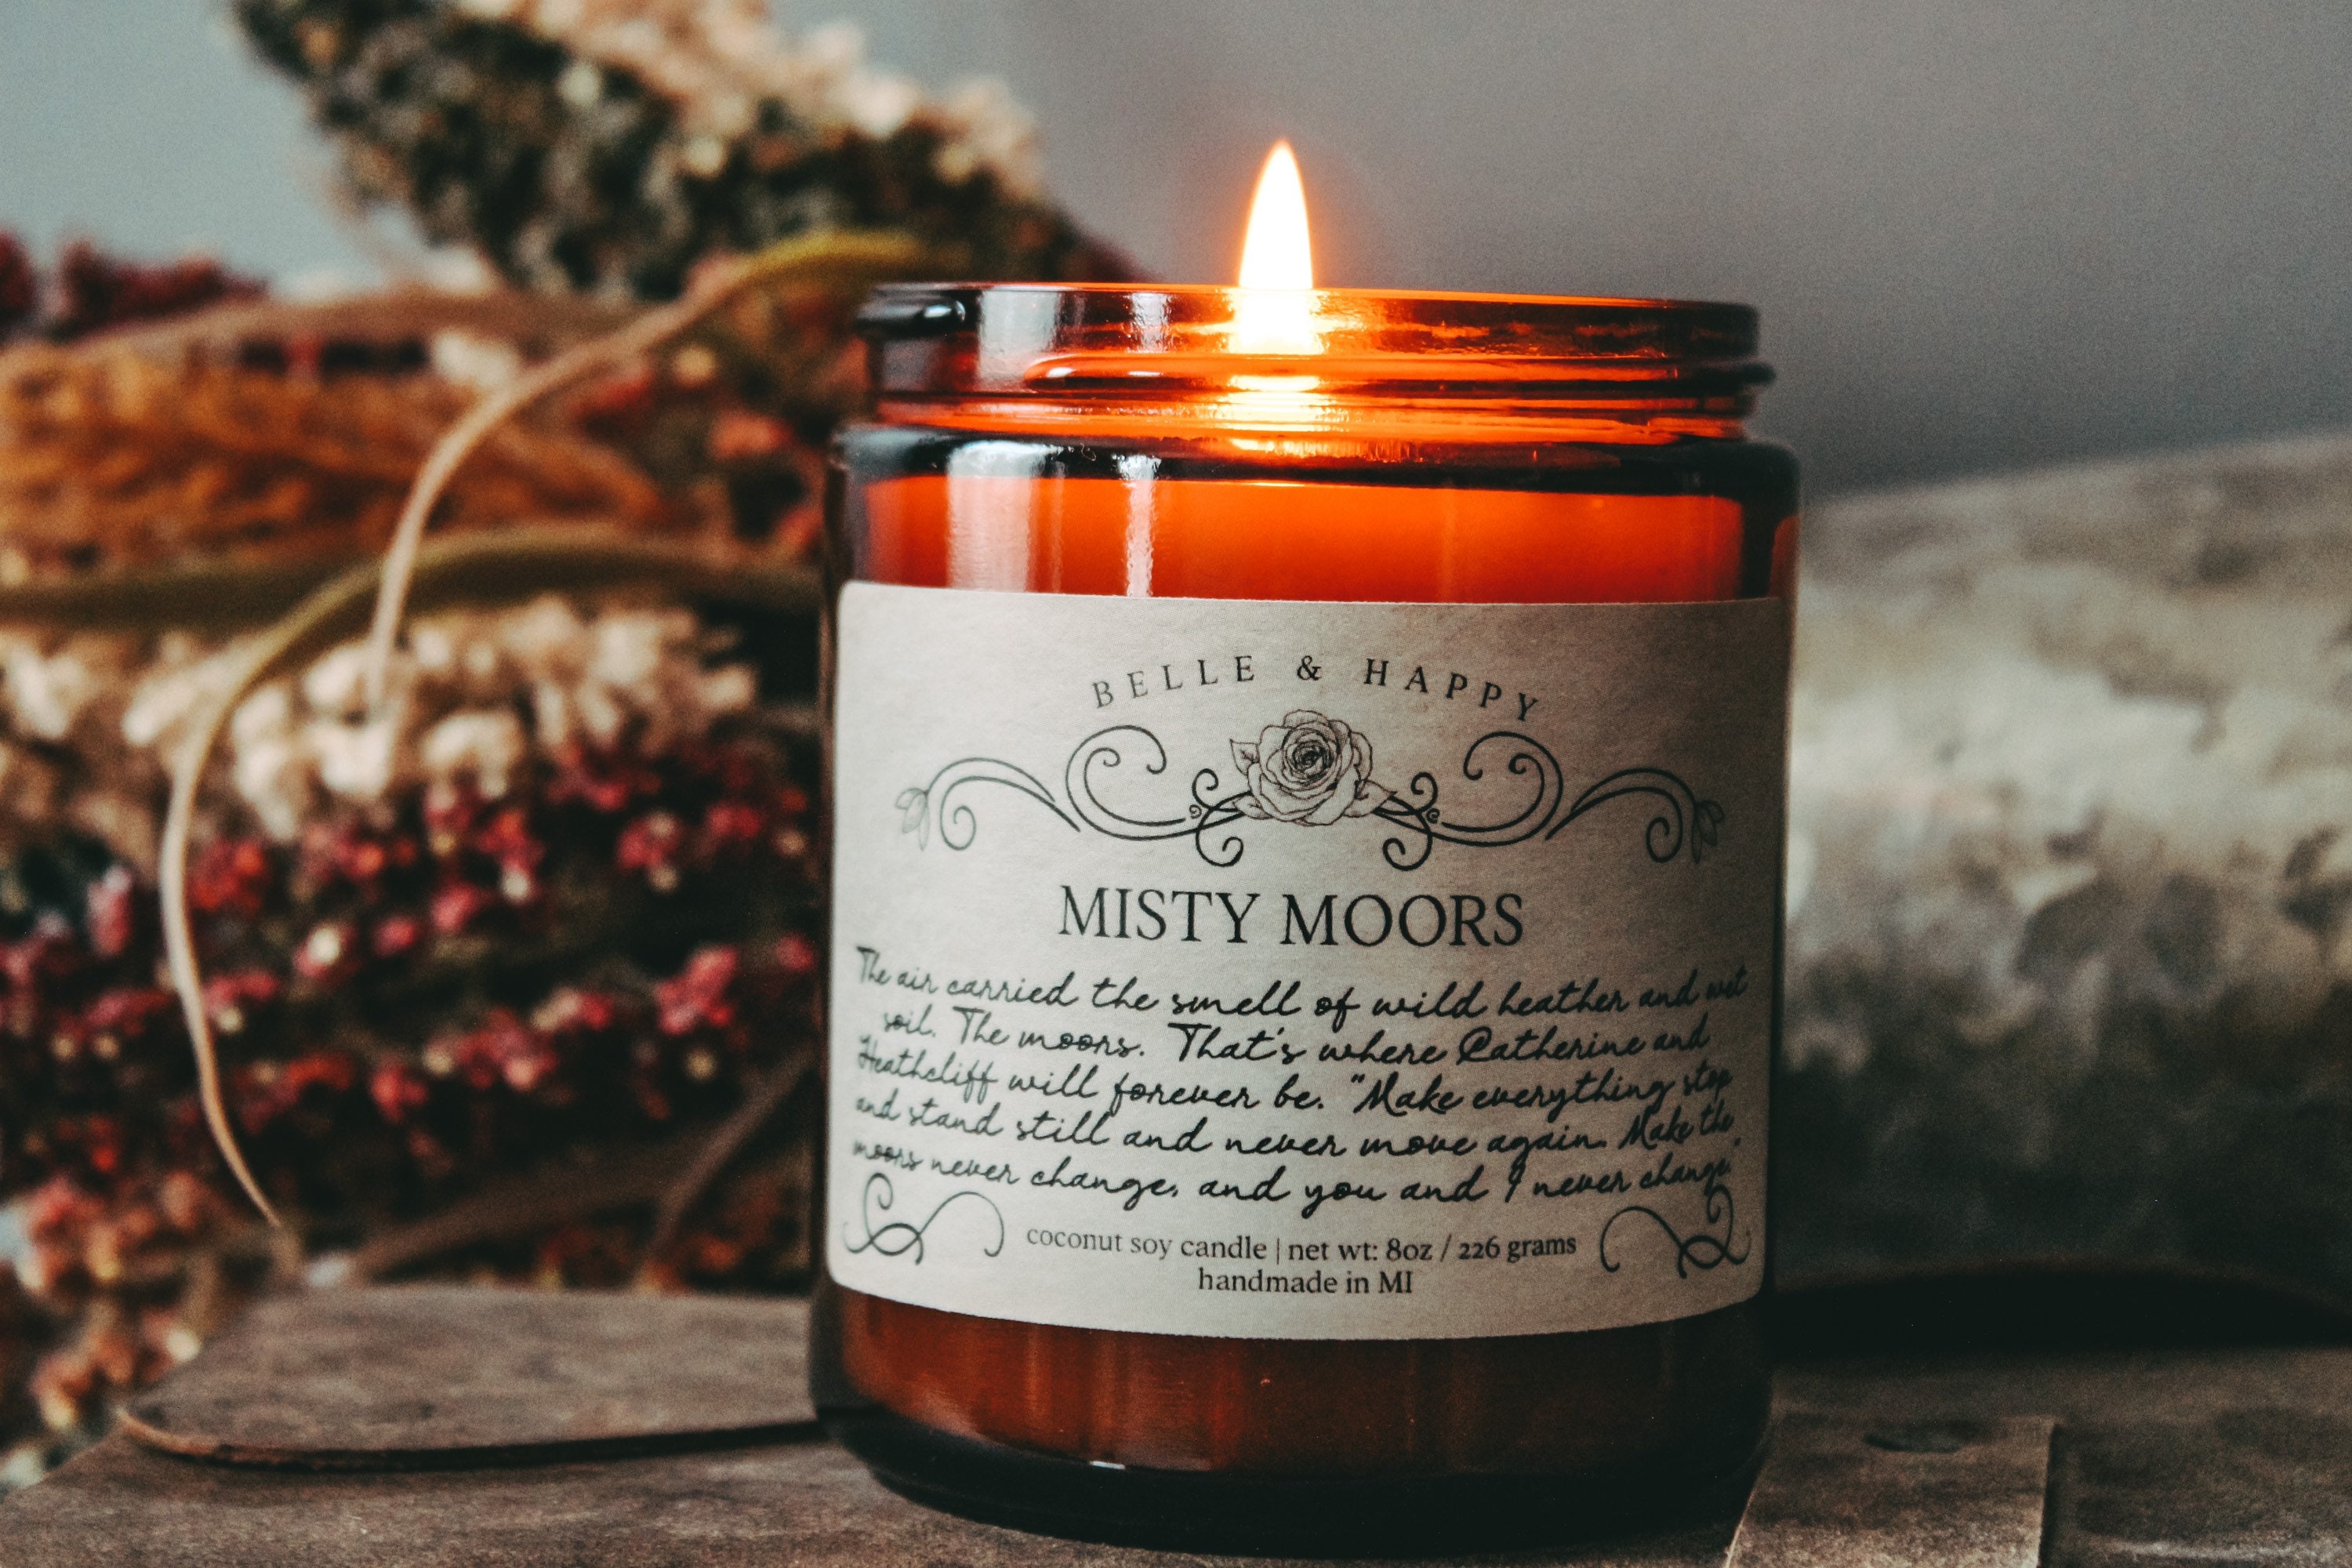 Wuthering Heights - Scented Book Candle – Noble Objects